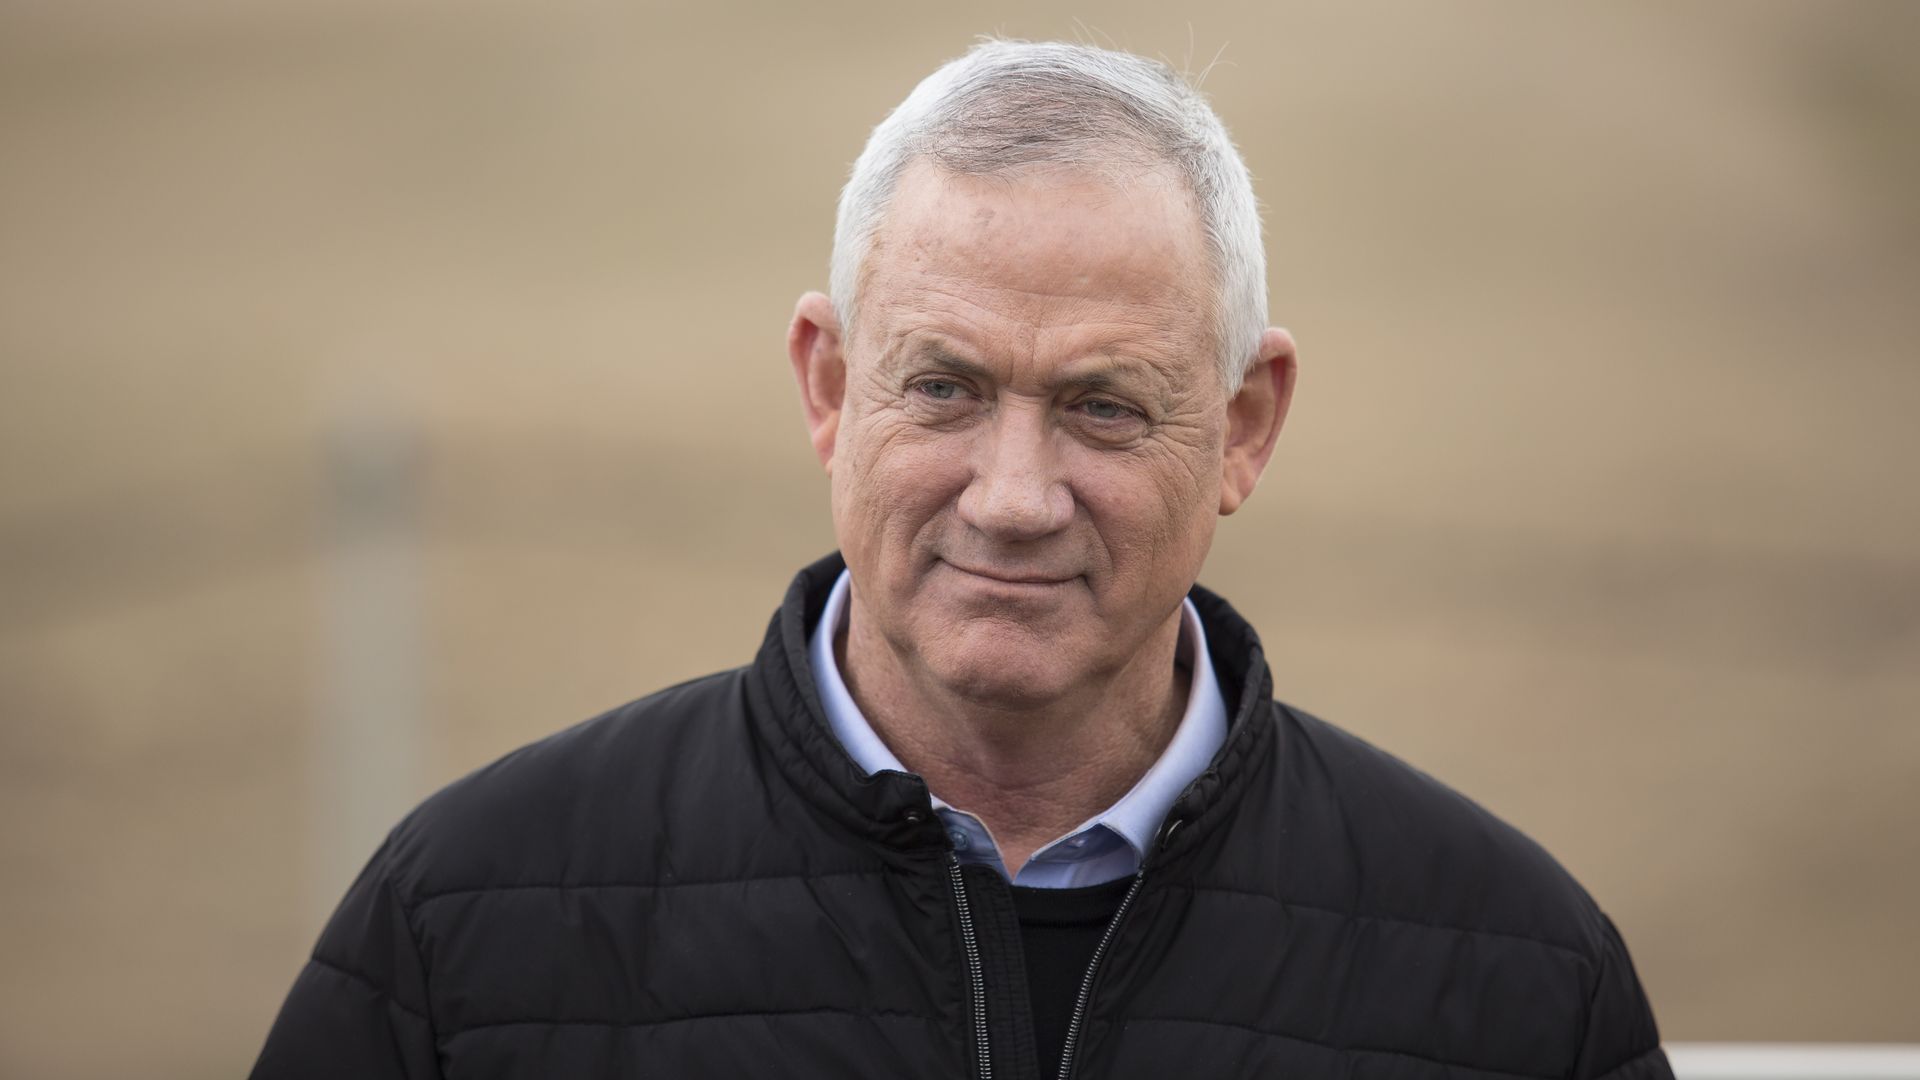 Benny Gantz says Trump peace plan should be implemented after election